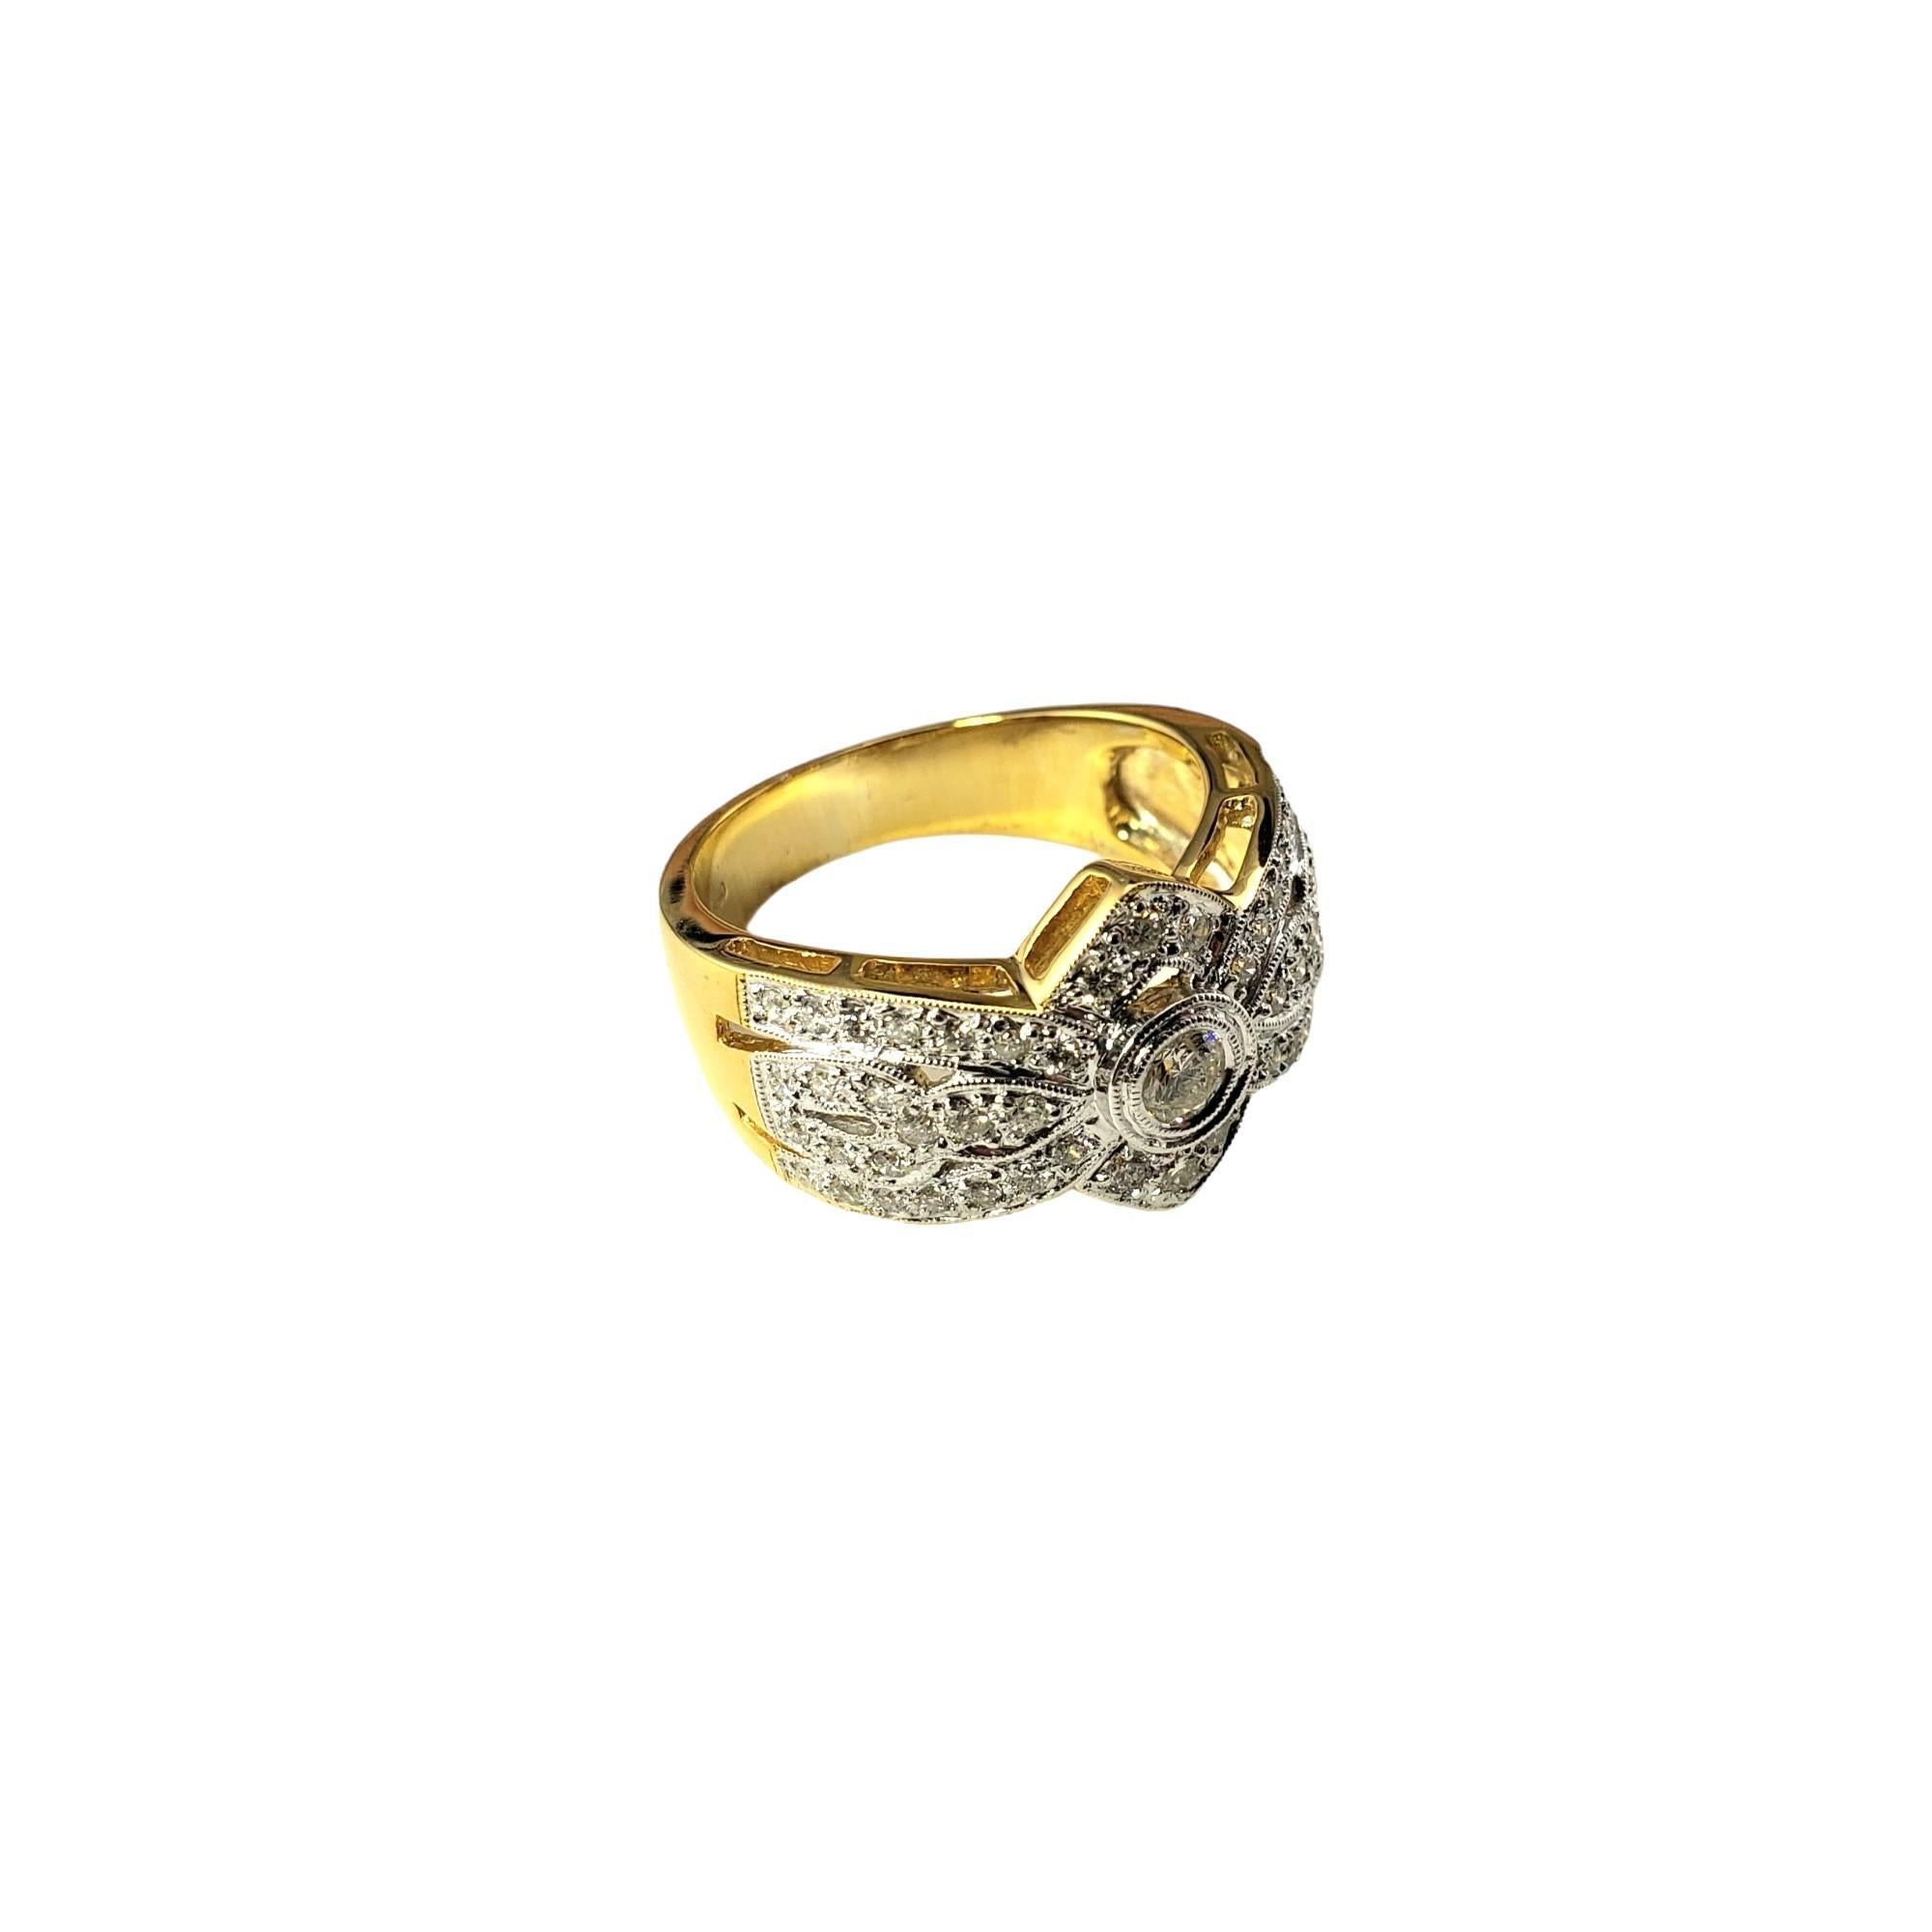  18K Yellow Gold and Diamond Ring Size 8 #15374 In Good Condition For Sale In Washington Depot, CT